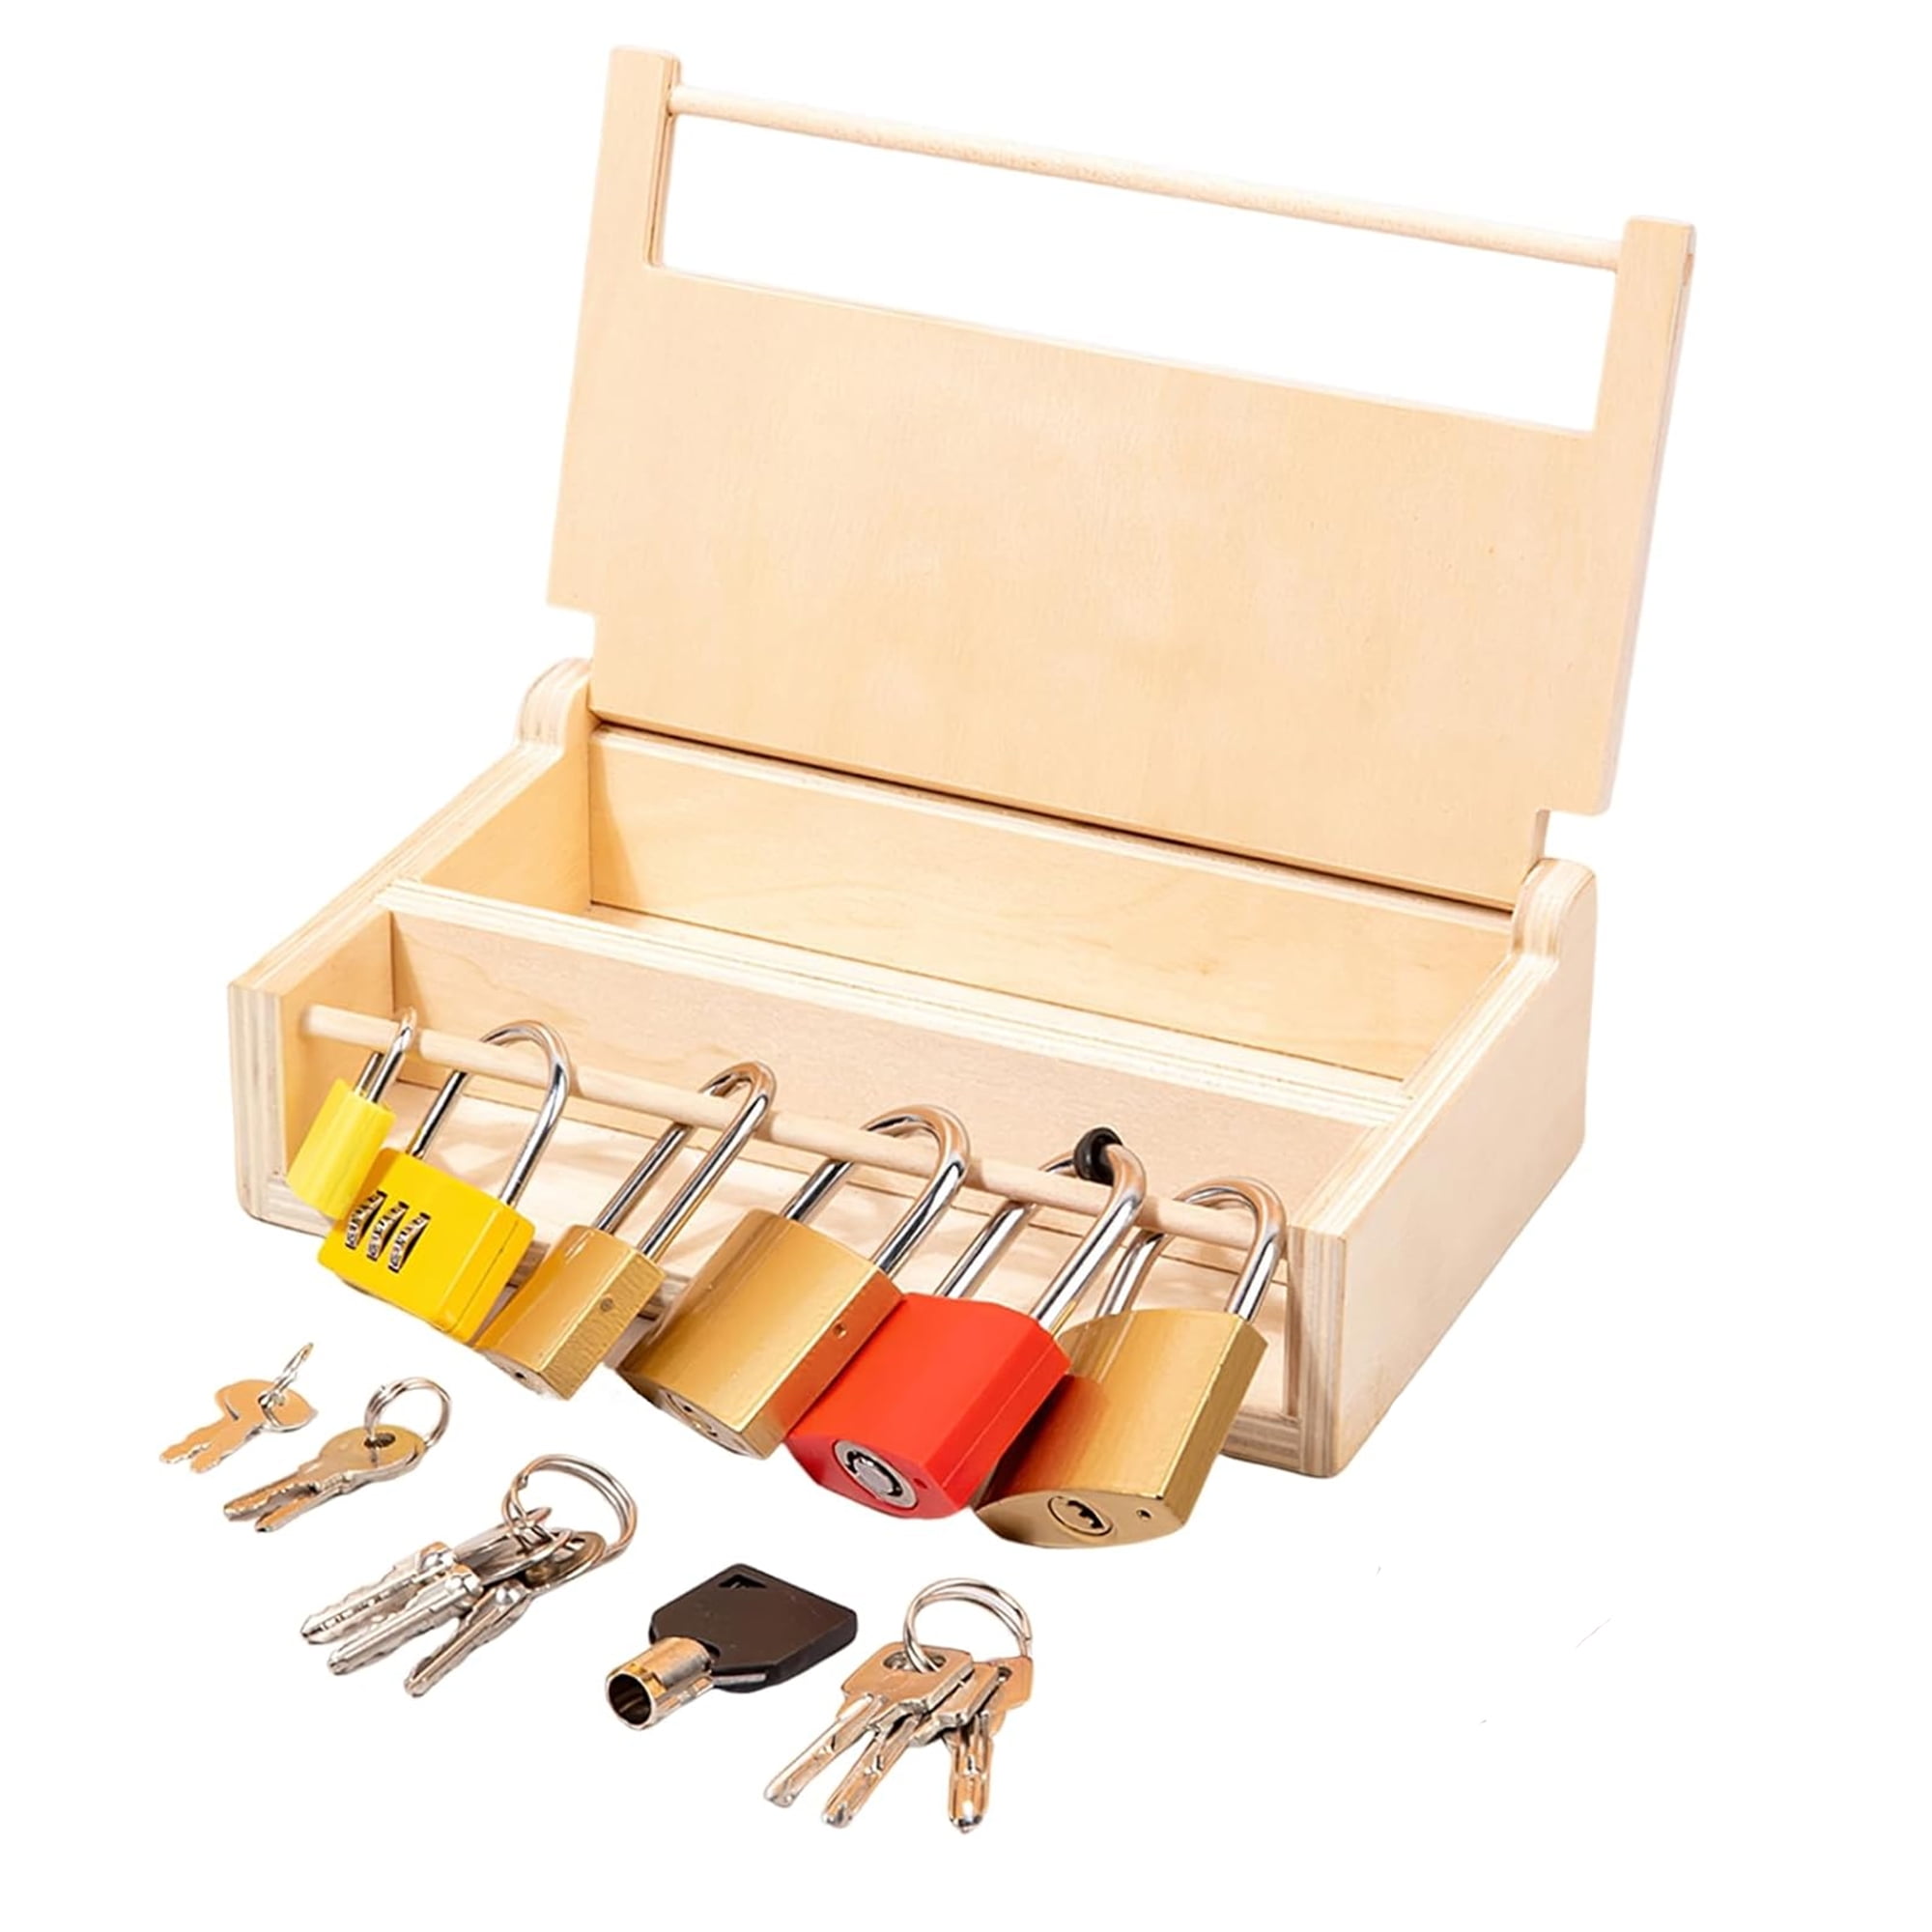 1set Wooden Lock Box With 6 Locks And Keys Toys For Boys And Girls